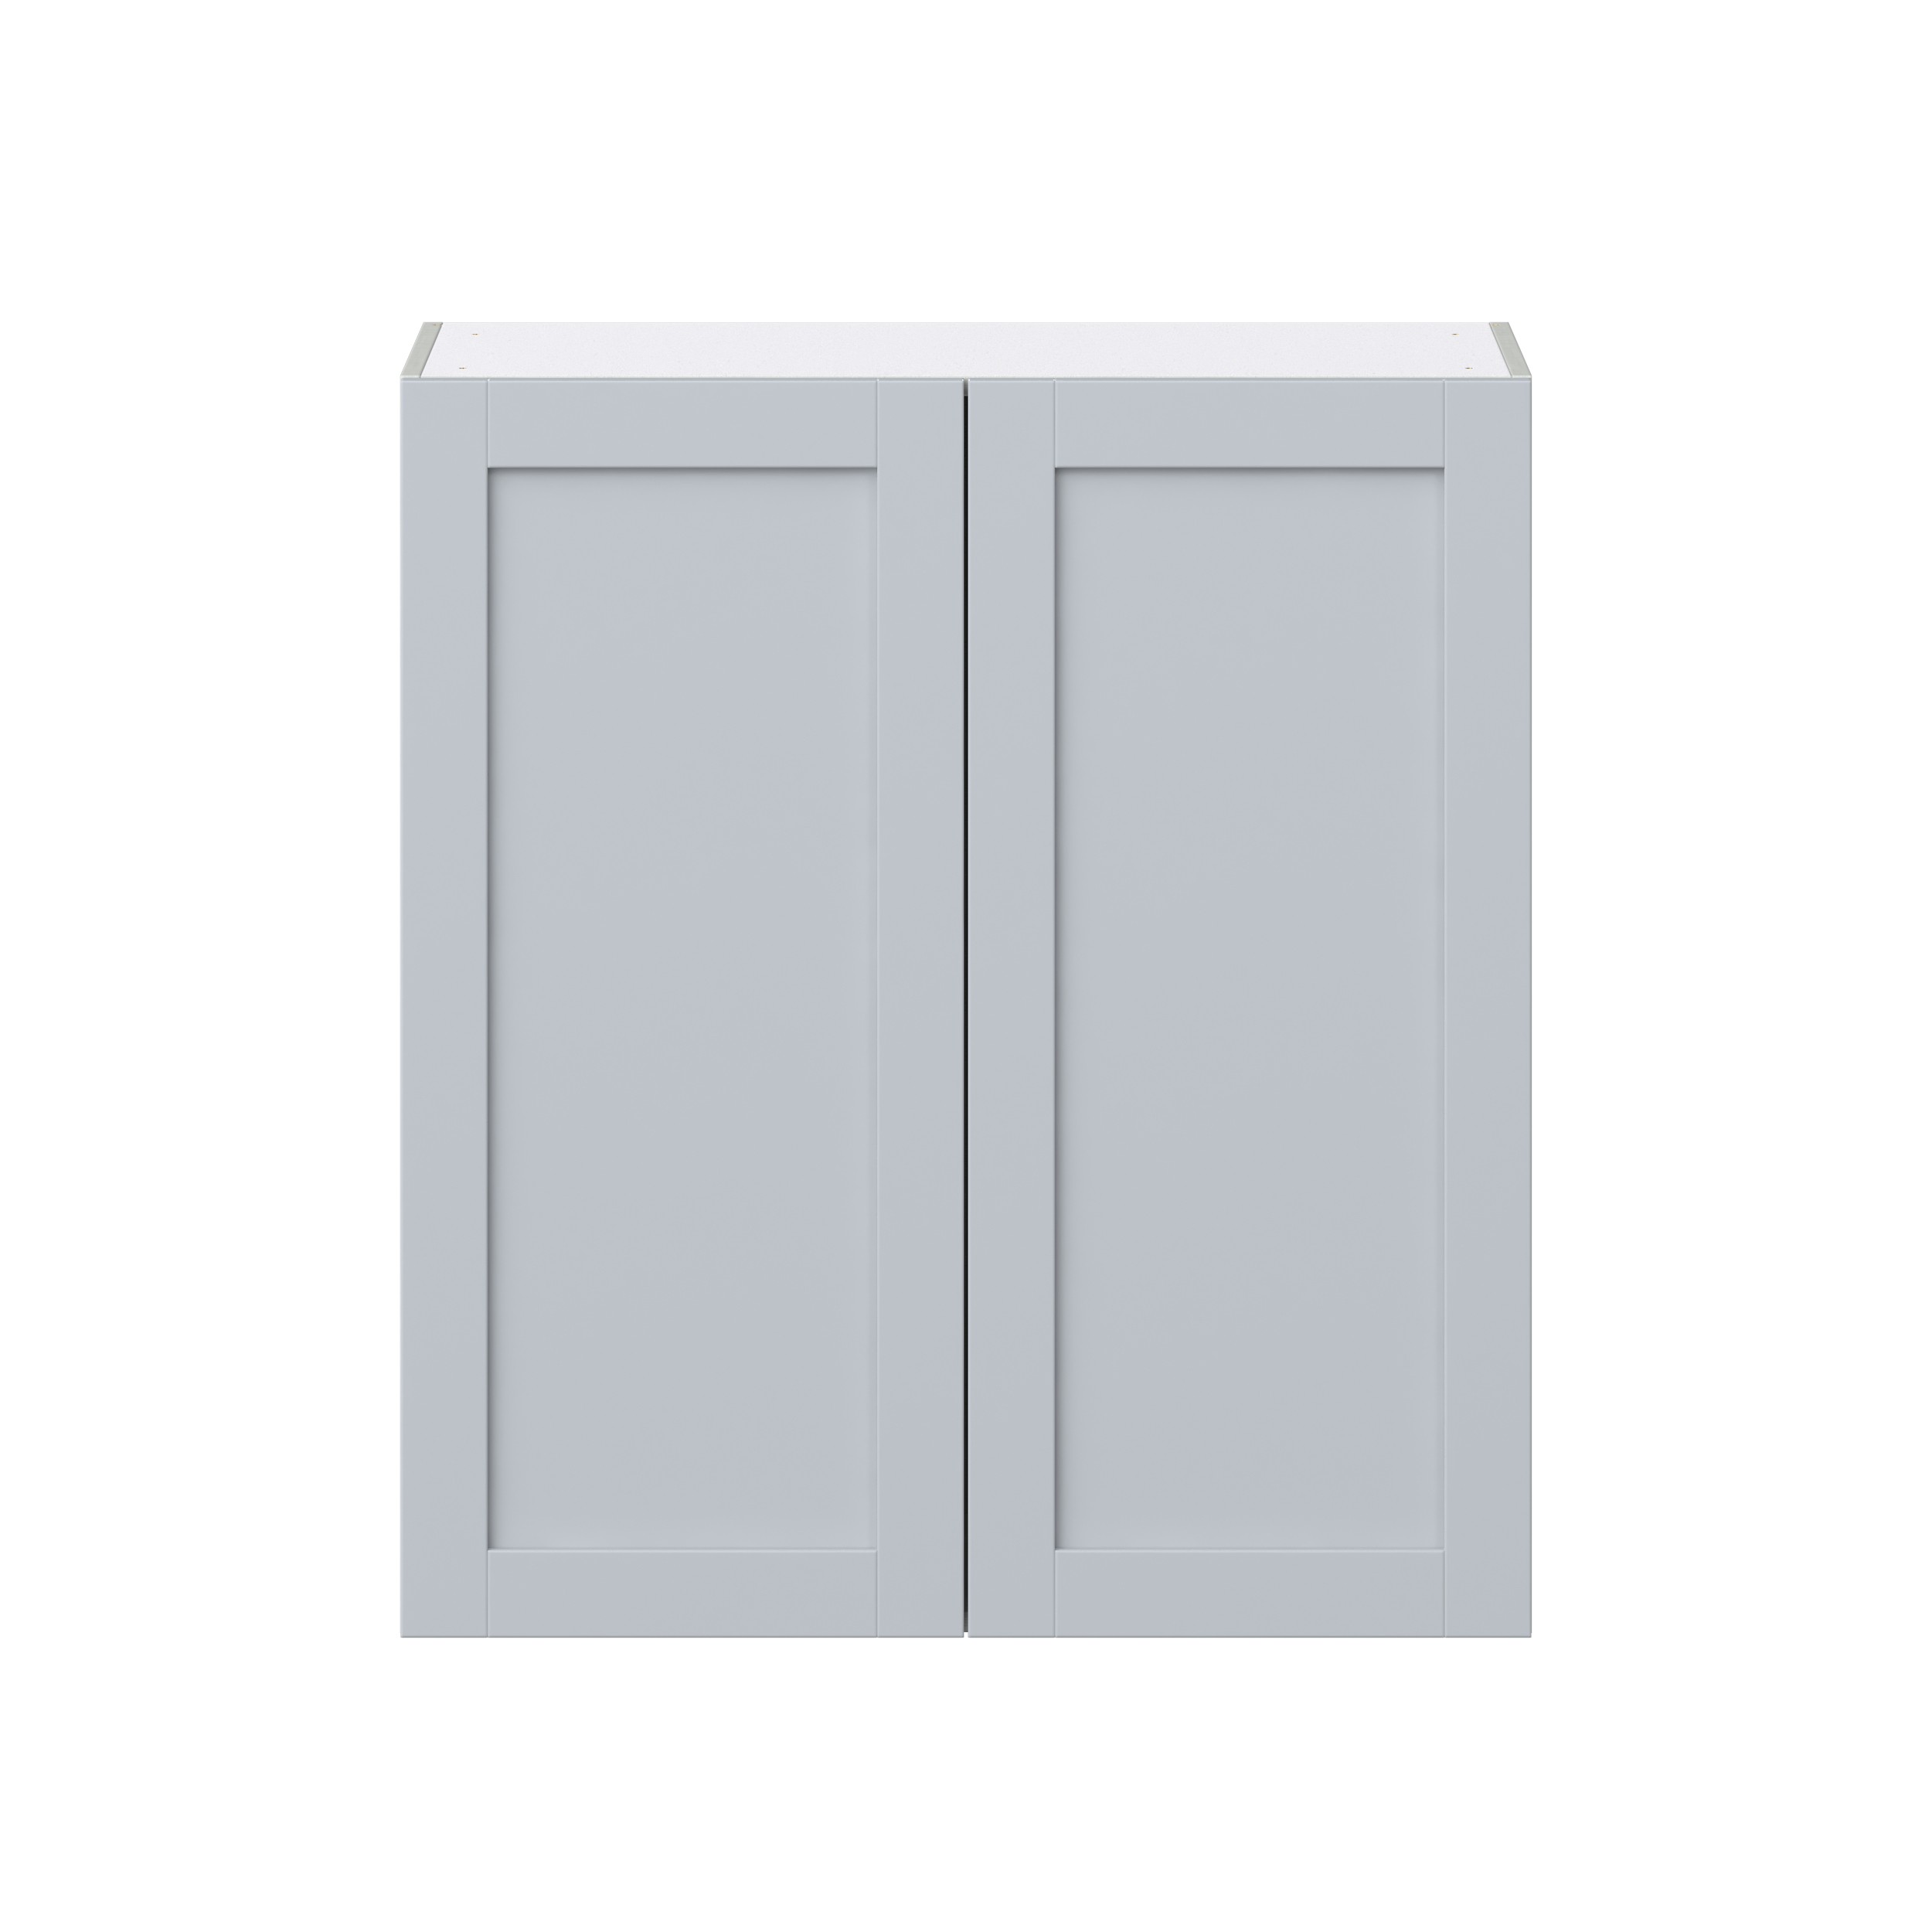 Sea Holly Light Gray Shaker Assembled Wall Cabinet with 2 Full High Doors (36 in. W x 40 in. H x 14 in. D)